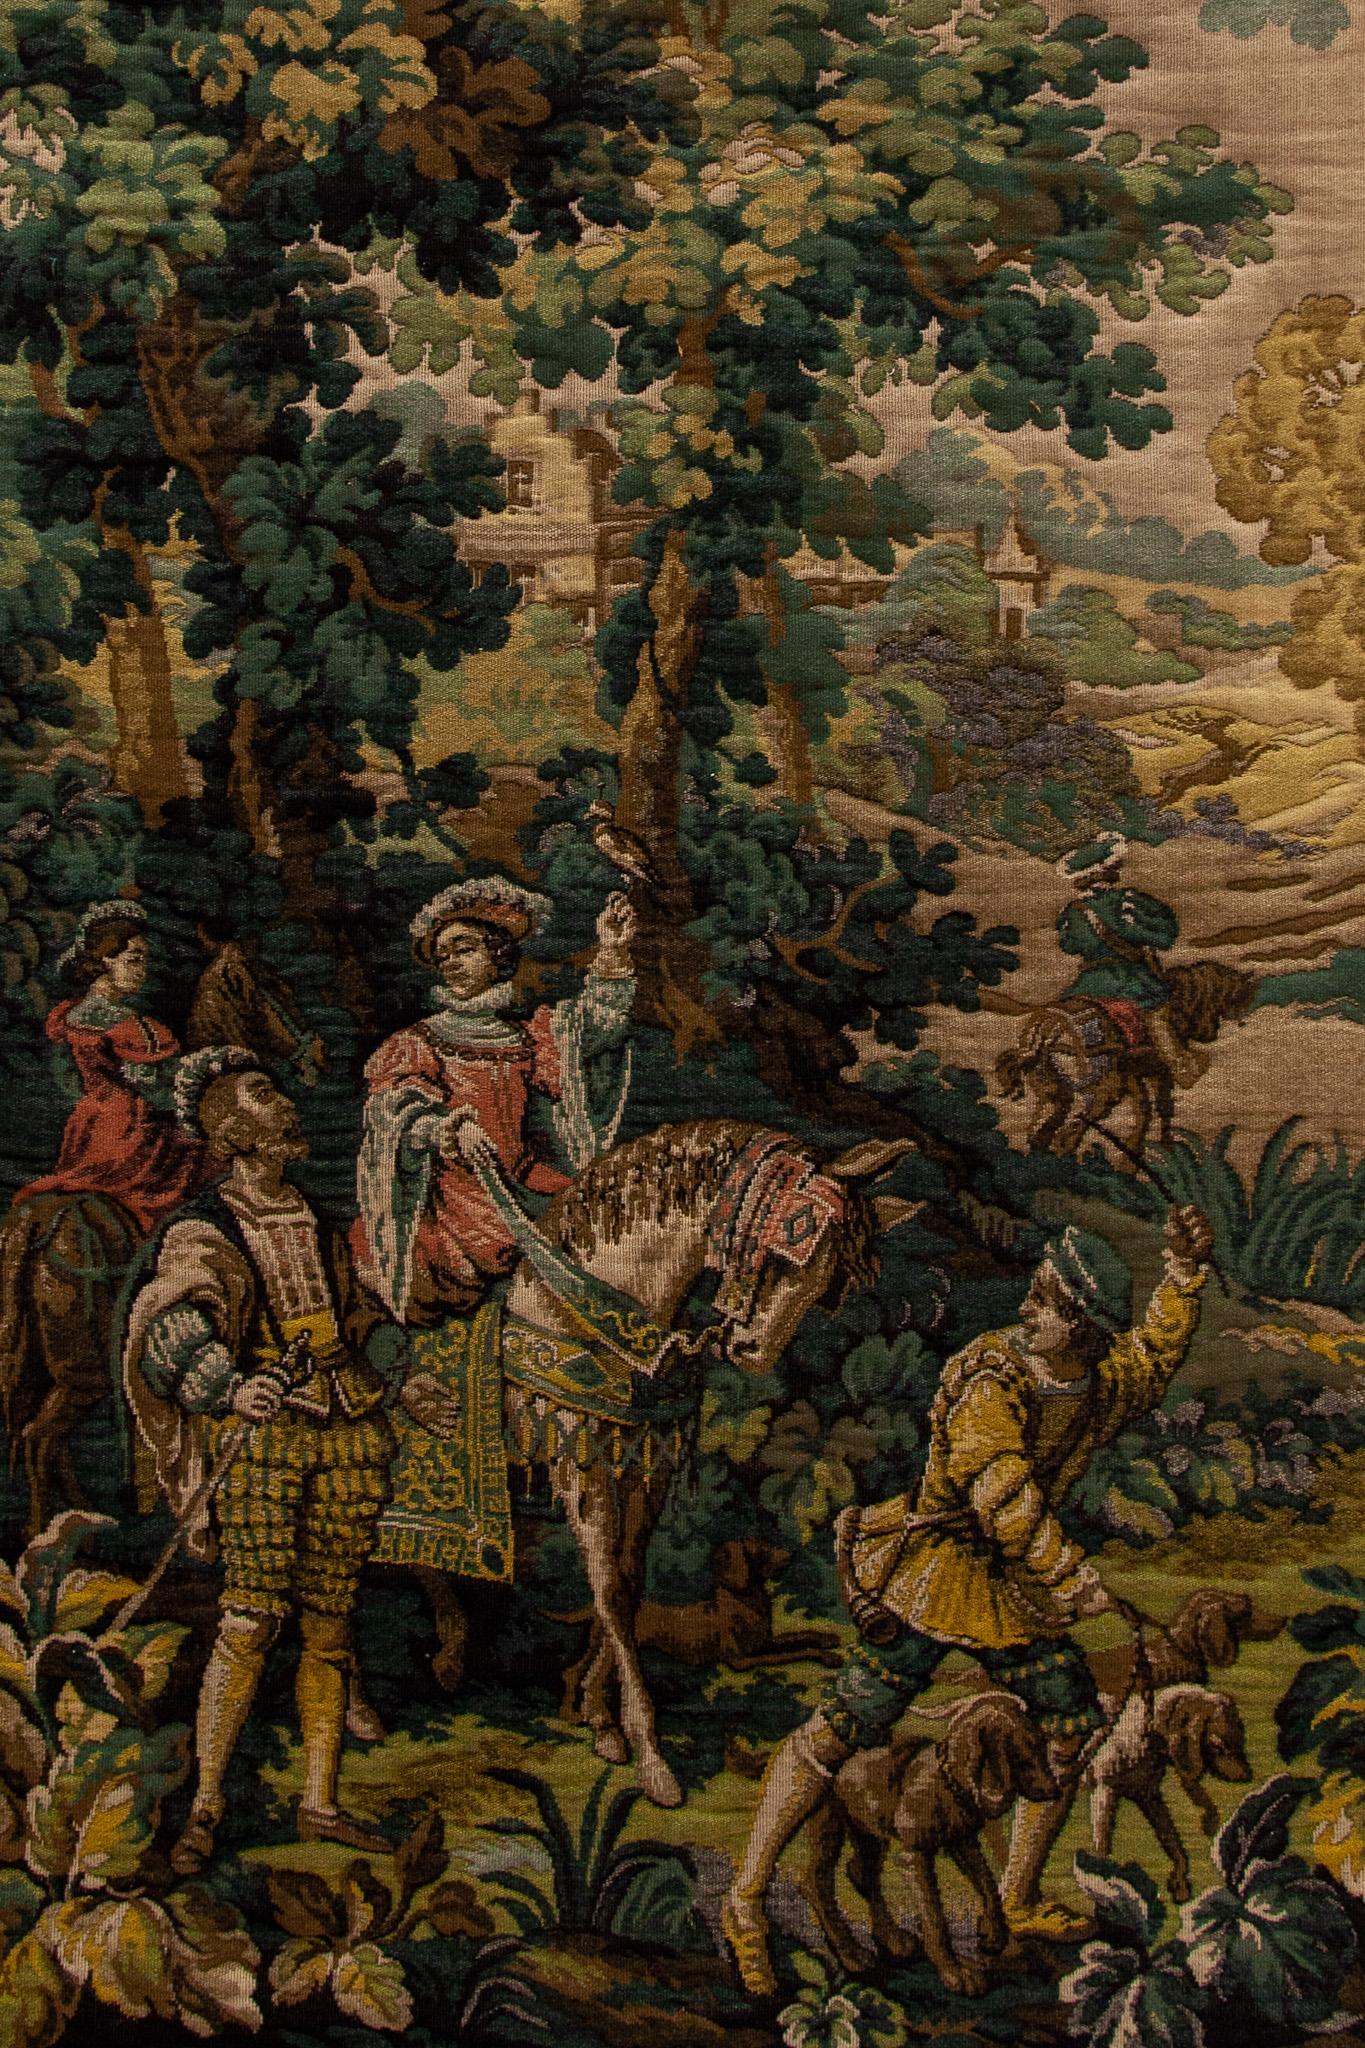 This is a magnificent and intricate authentic hand woven 19th century Antique Flemish aubusson tapestry a rural scene during the start of the hunt with horses and dogs and the falconer in a forest landscape framed with a rich floral and leaf pattern